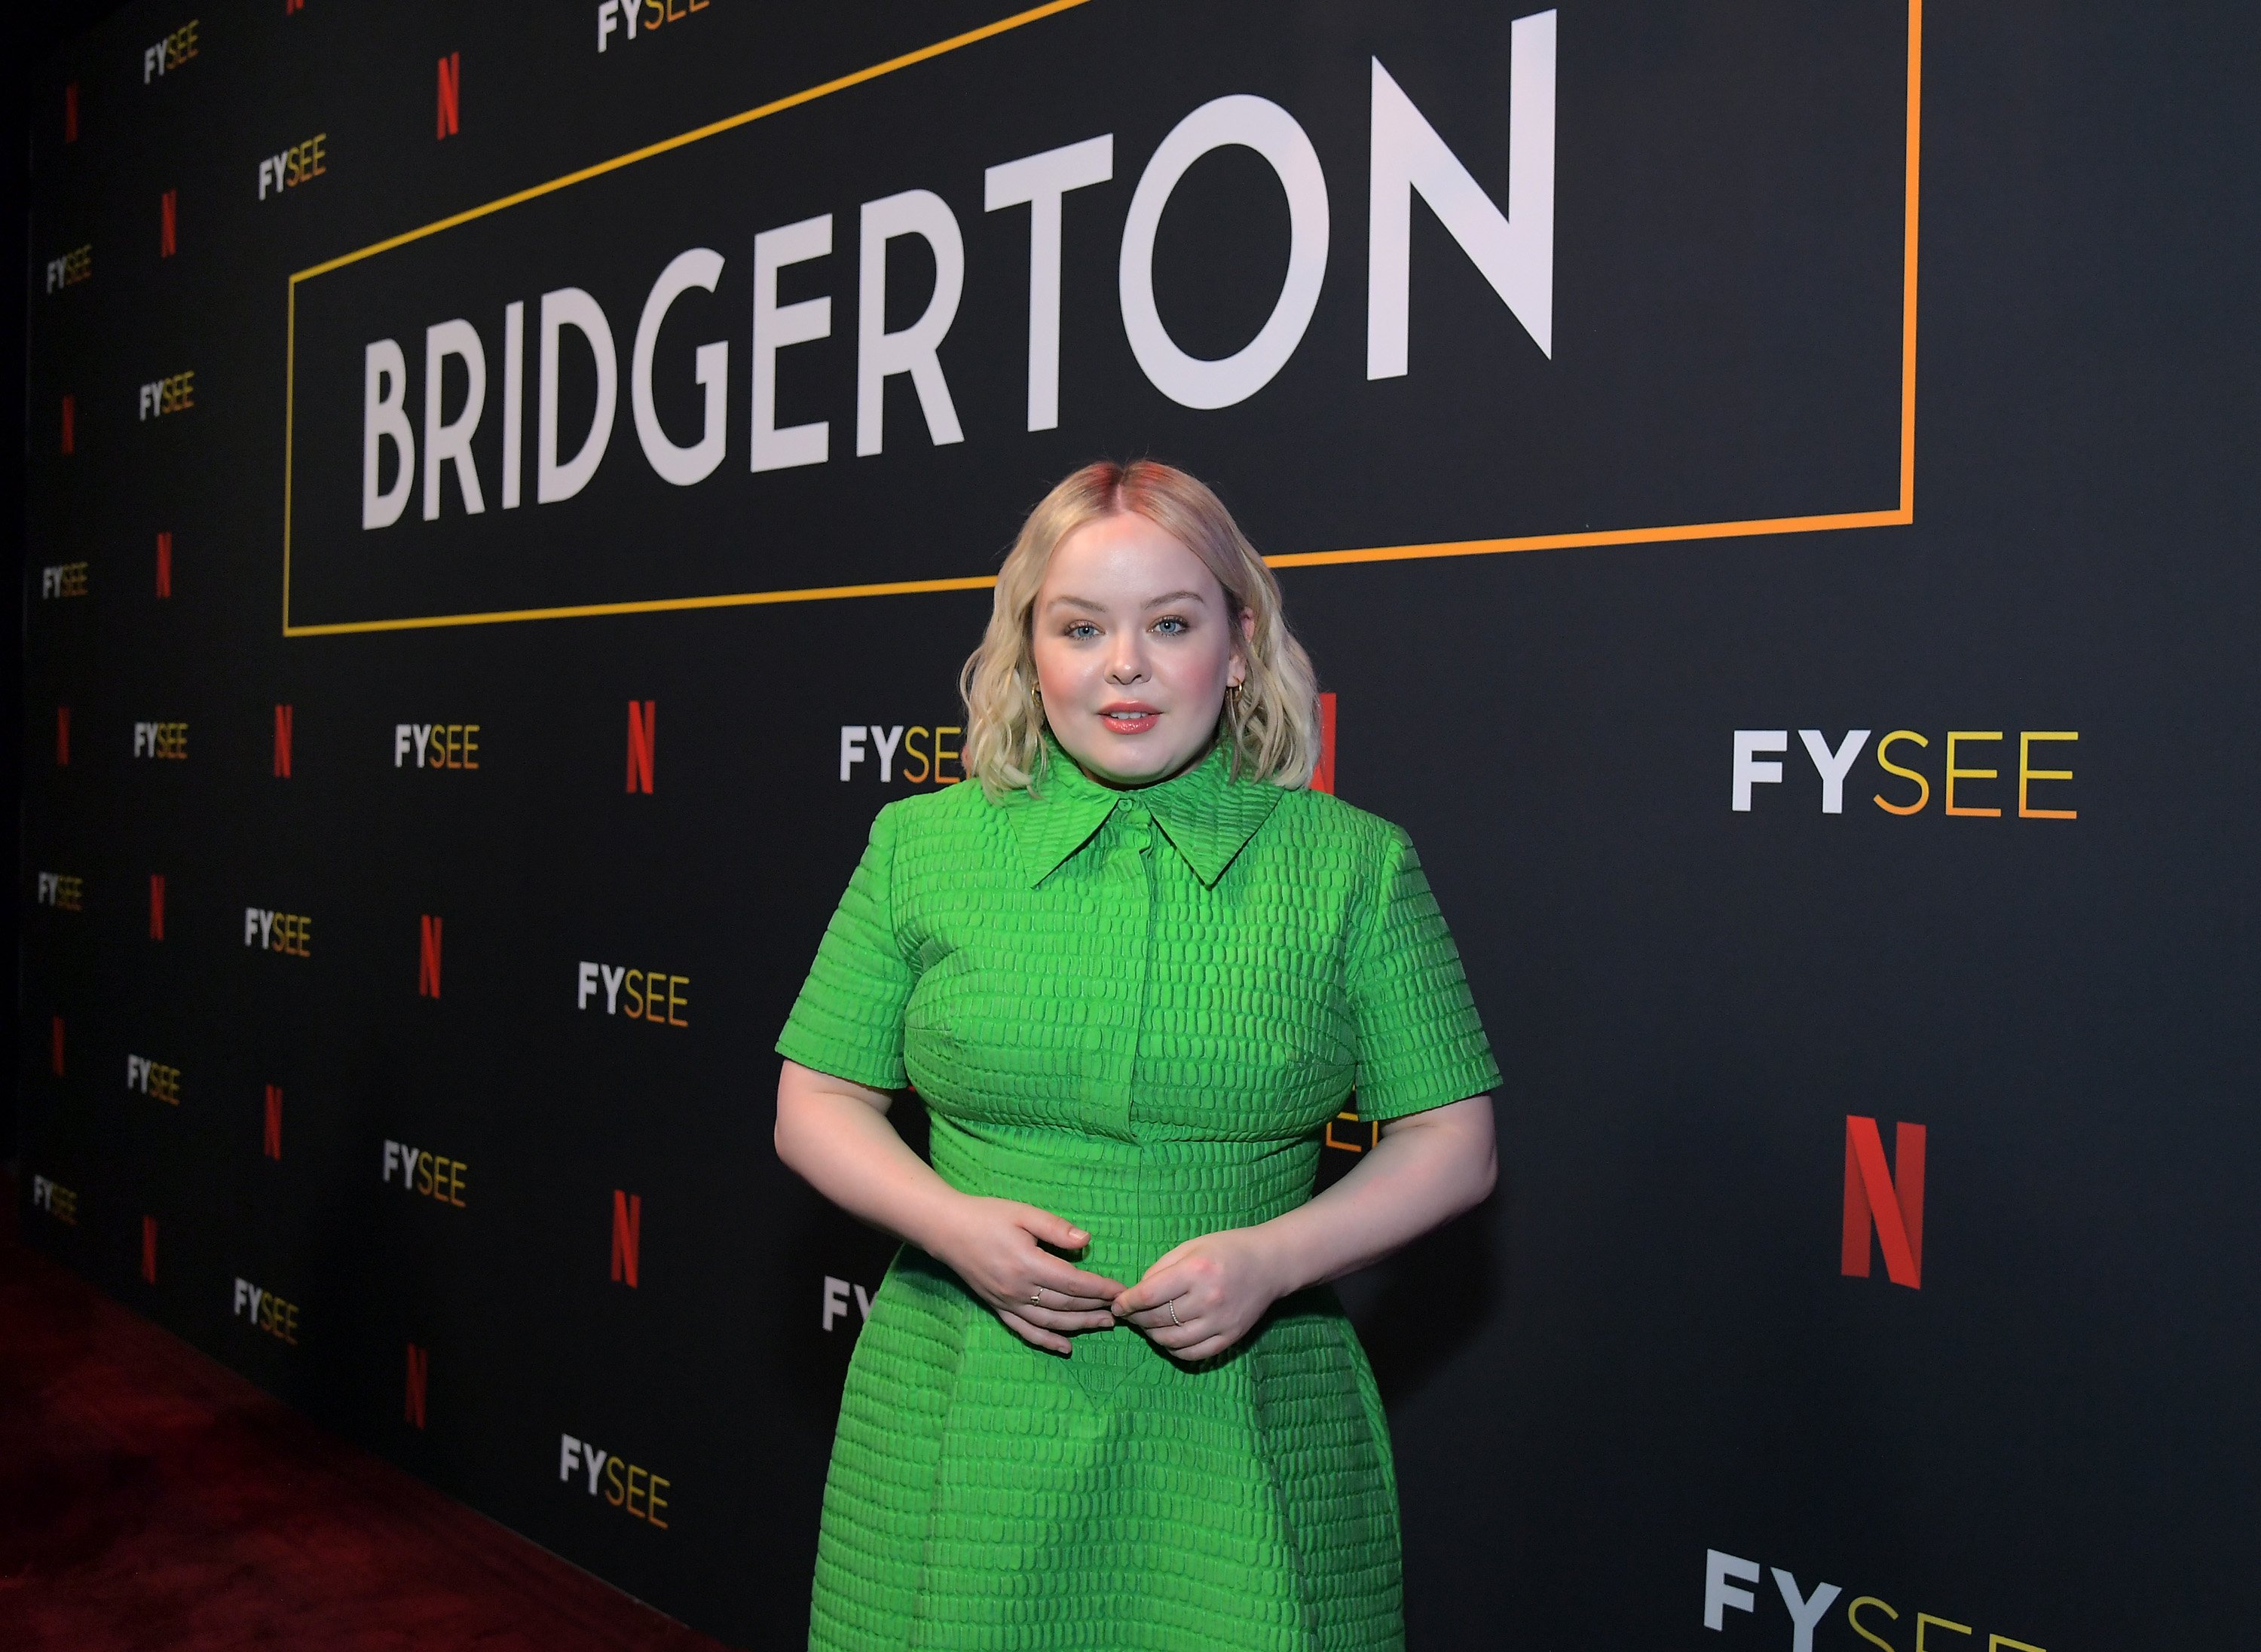 ‘Bridgerton’ Star Nicola Coughlan Shares the Moment She Realized She Was Famous